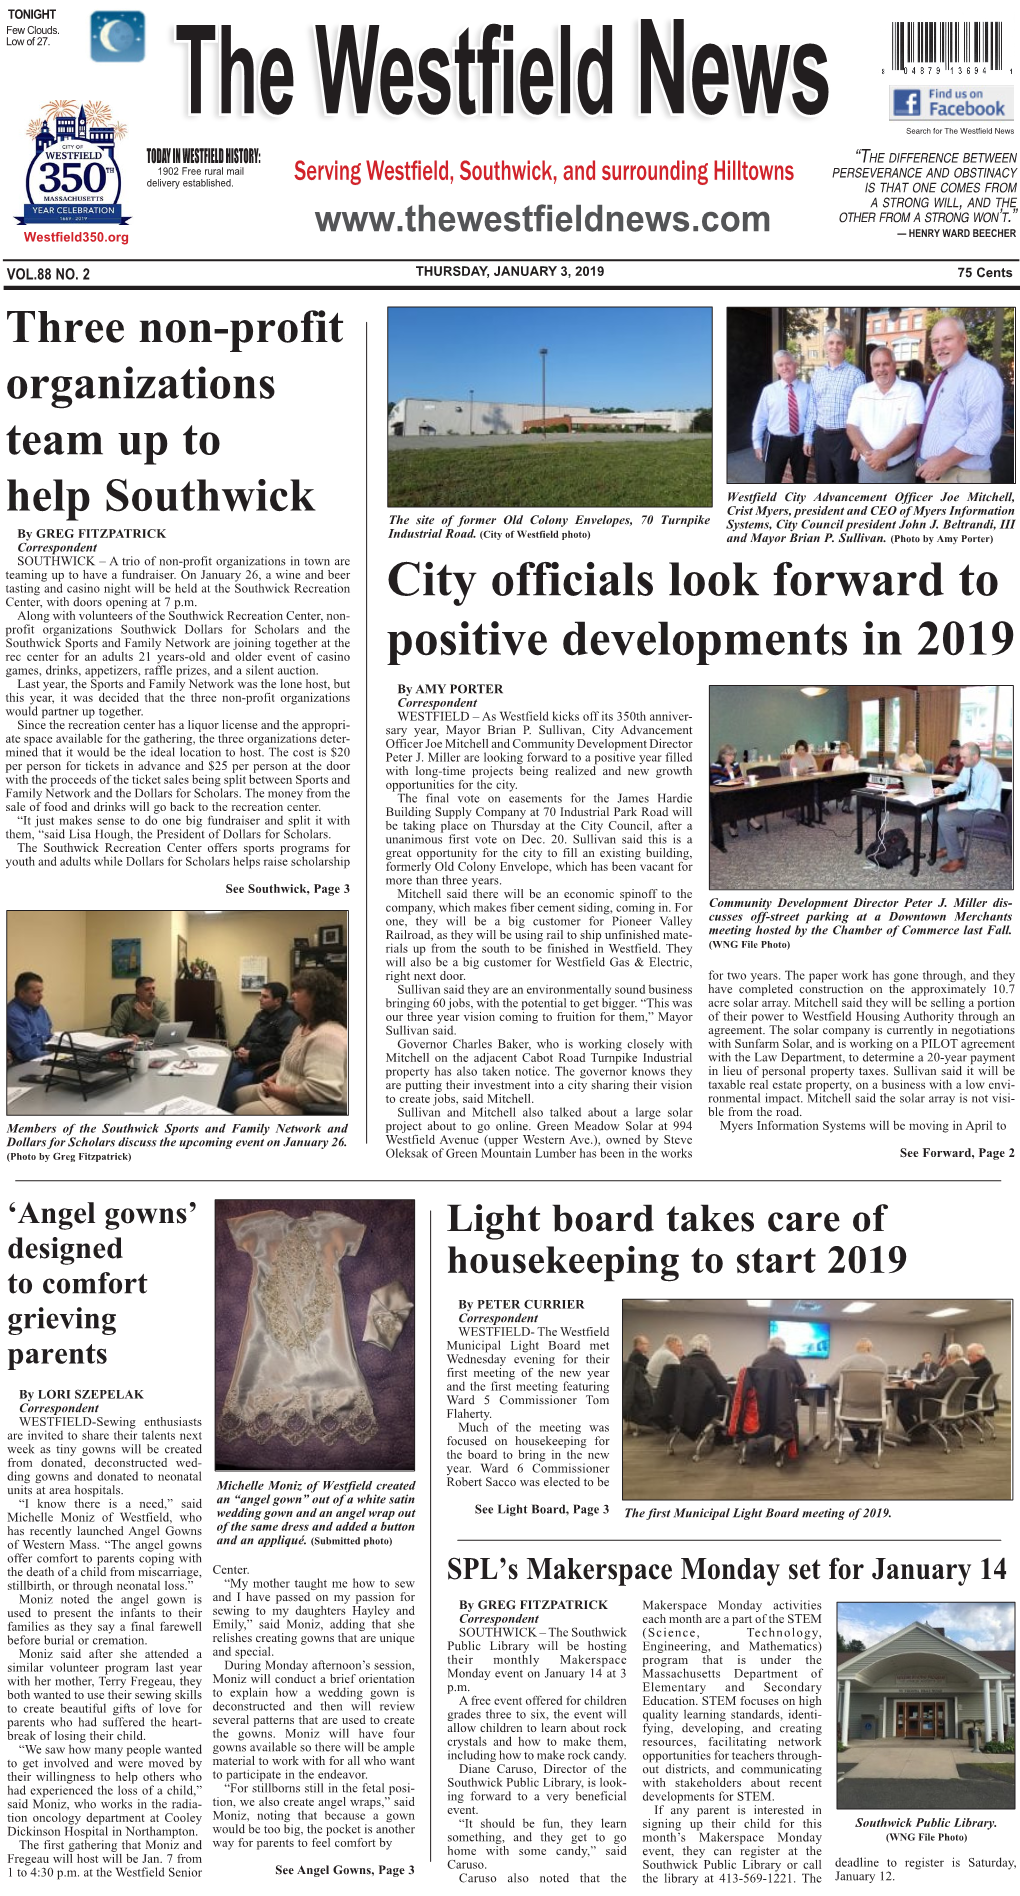 City Officials Look Forward to Positive Developments in 2019